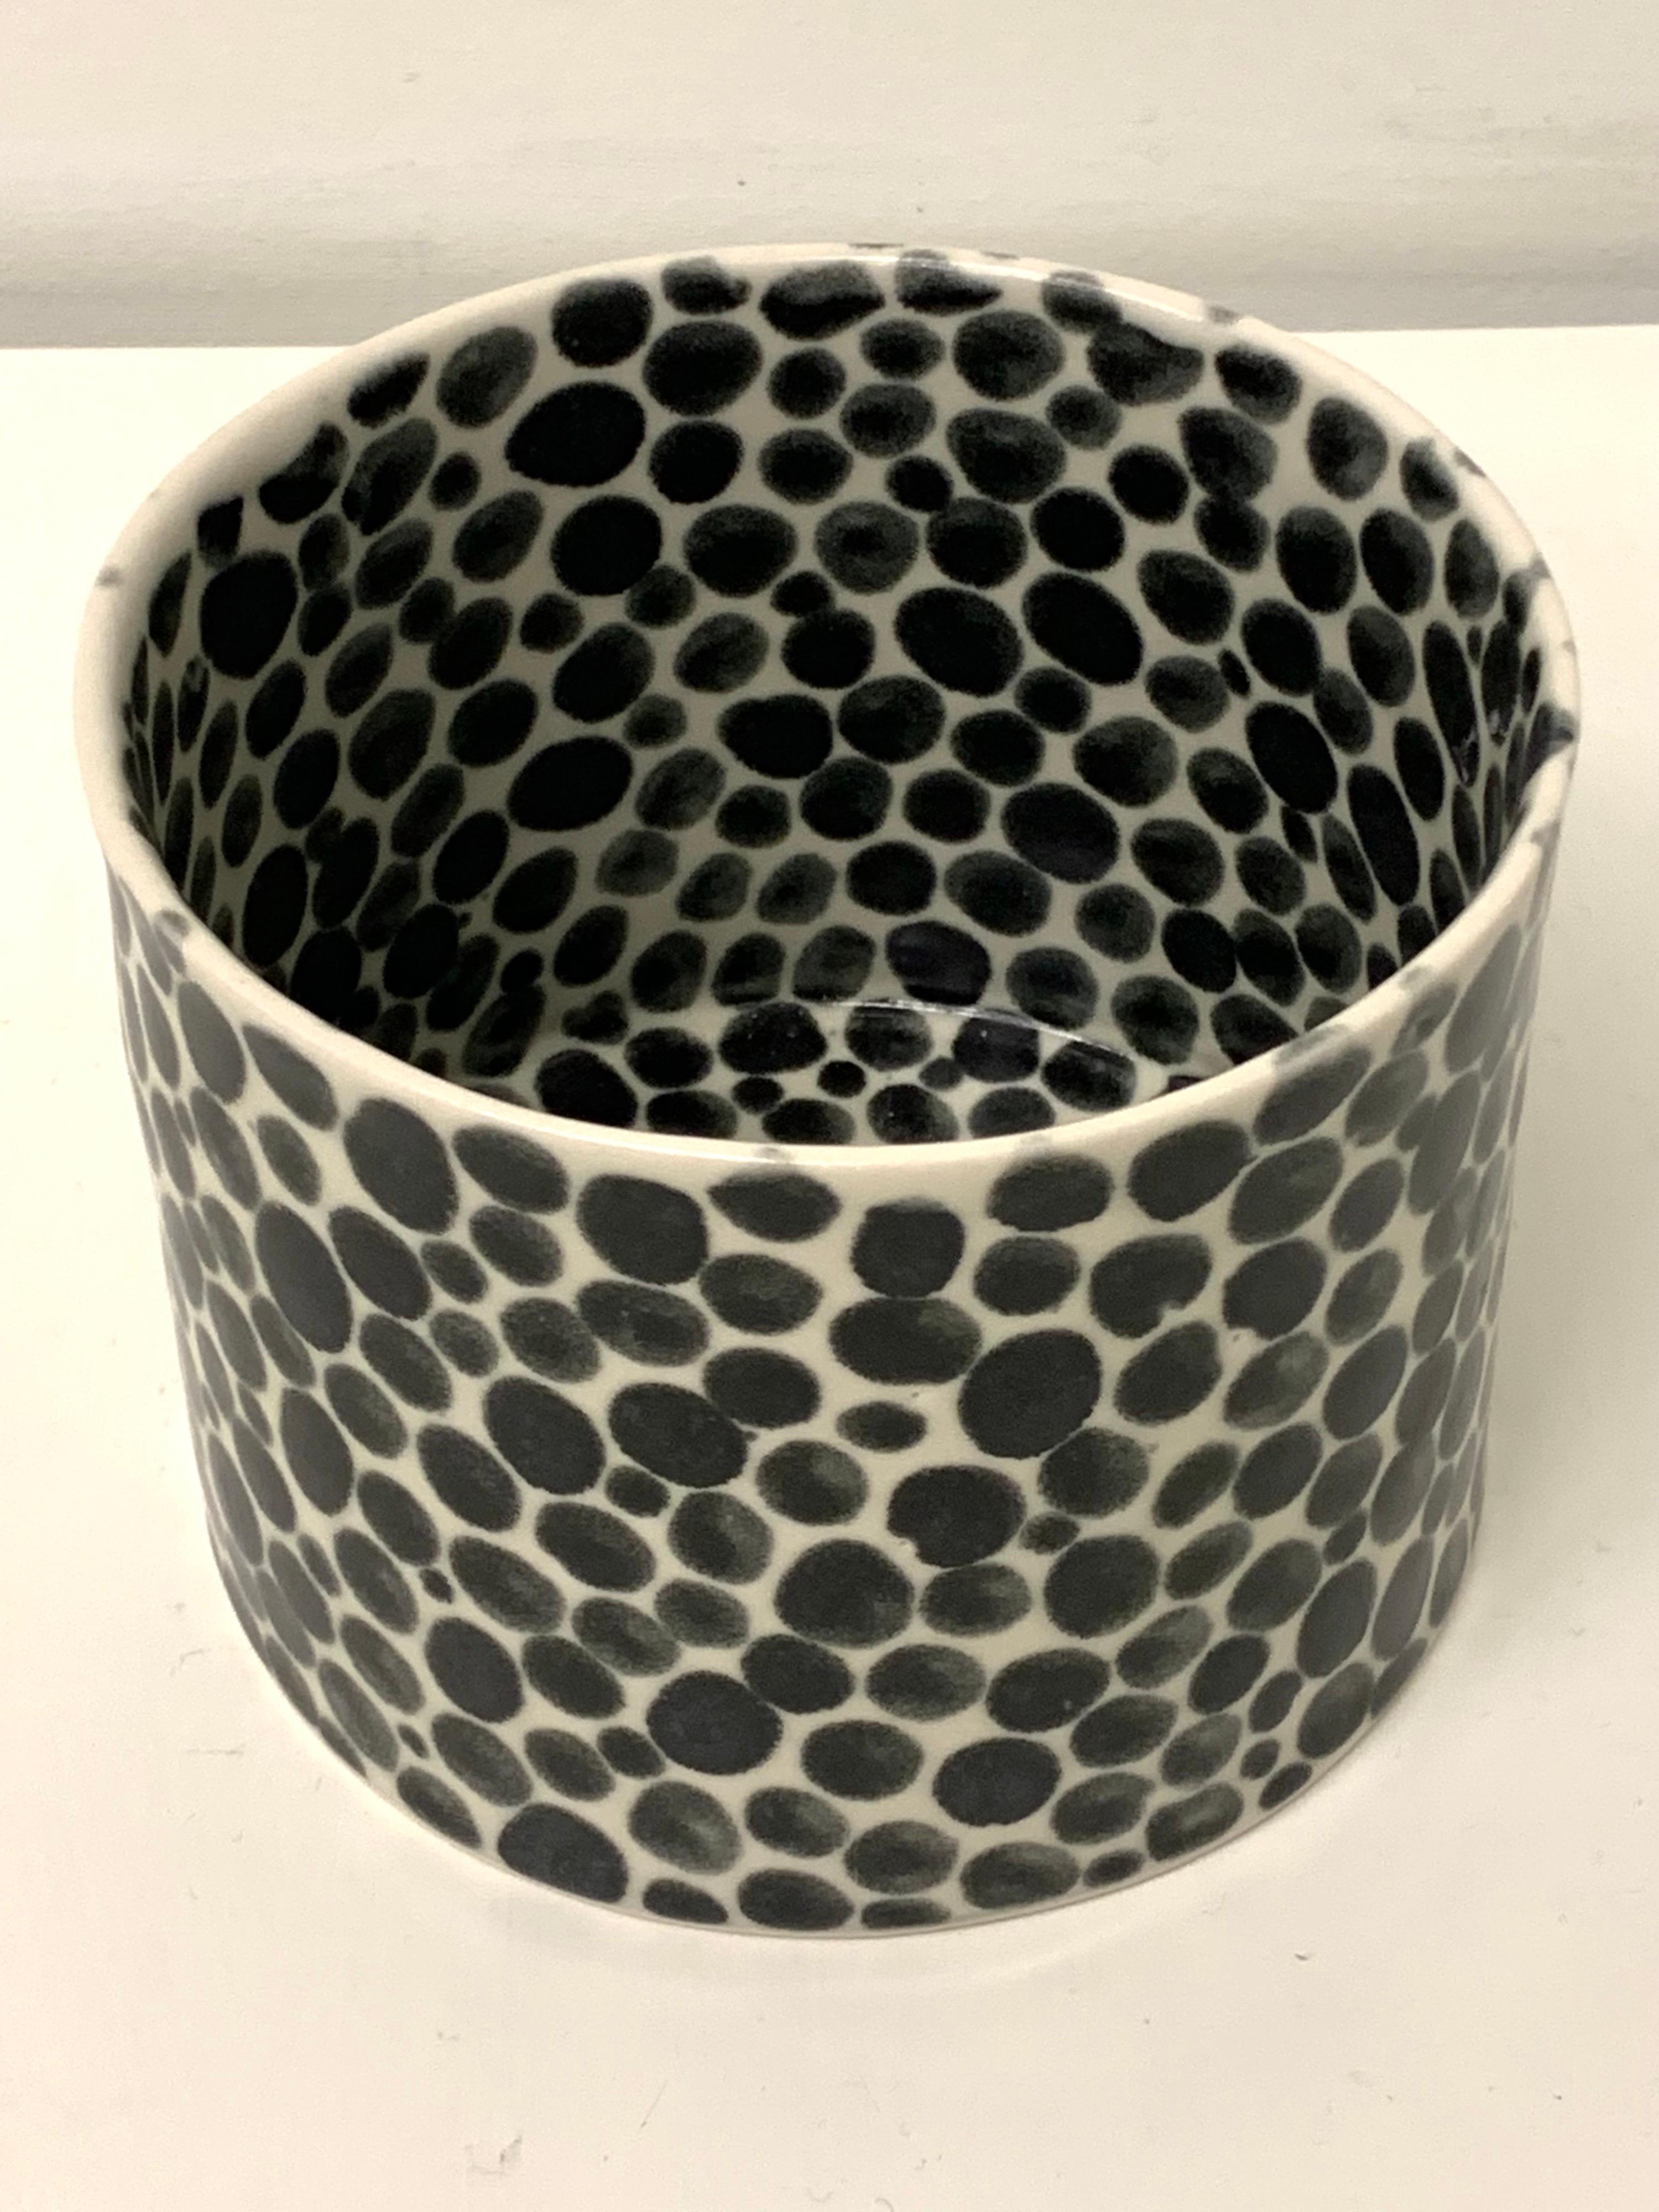 Porcelain vase in the shape of cylinder hand painted with black dots by artist Lana Kova. Made in Tribeca NYC.